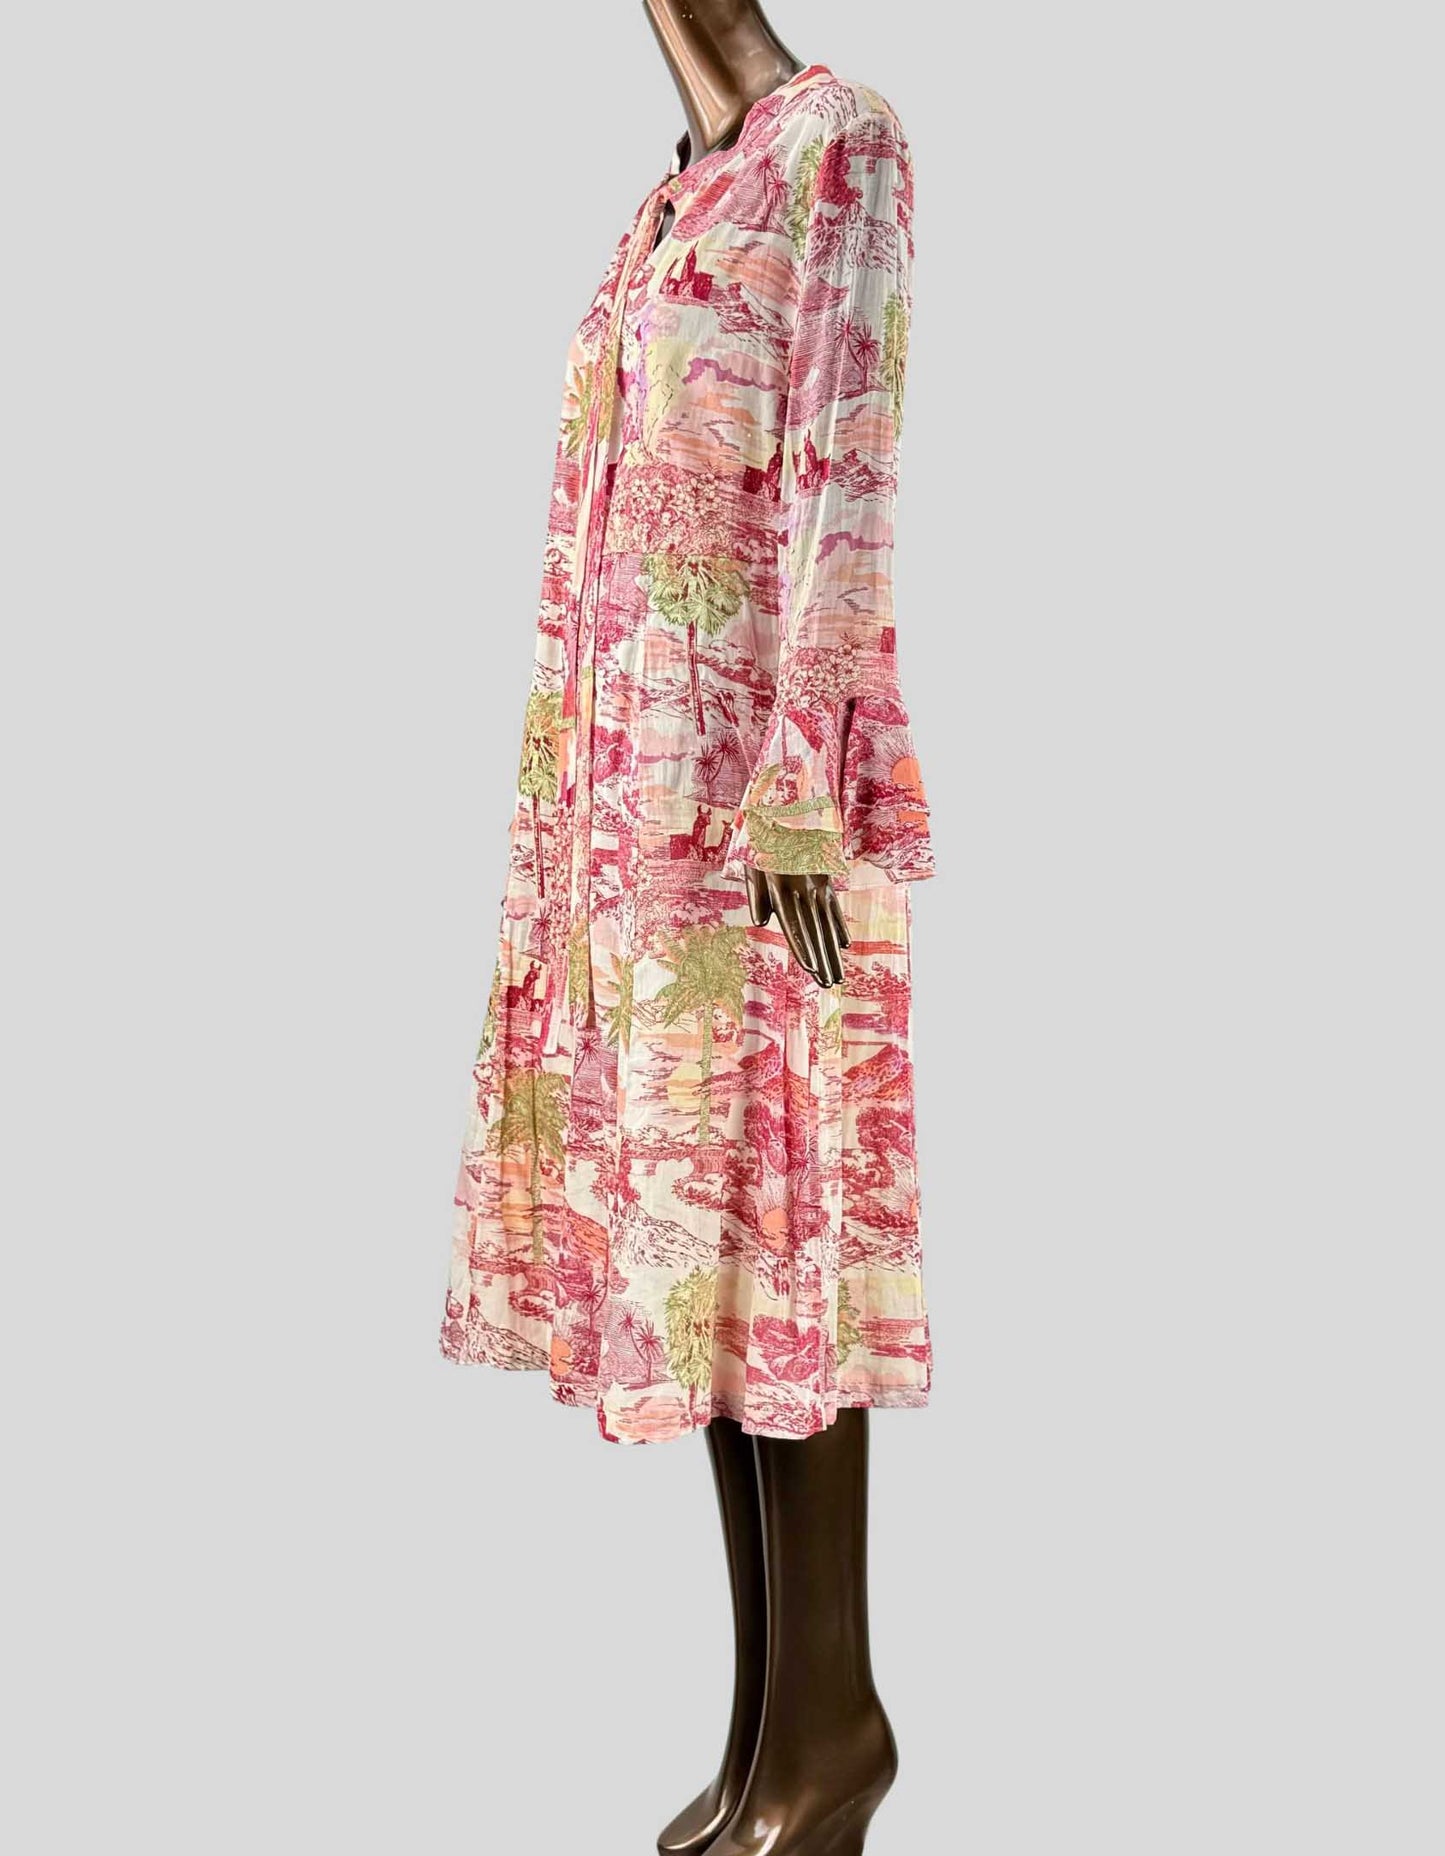 EMPORIO SIRENEUSE Floral Print Long Dress w/ Tags - 48 IT | 12 US